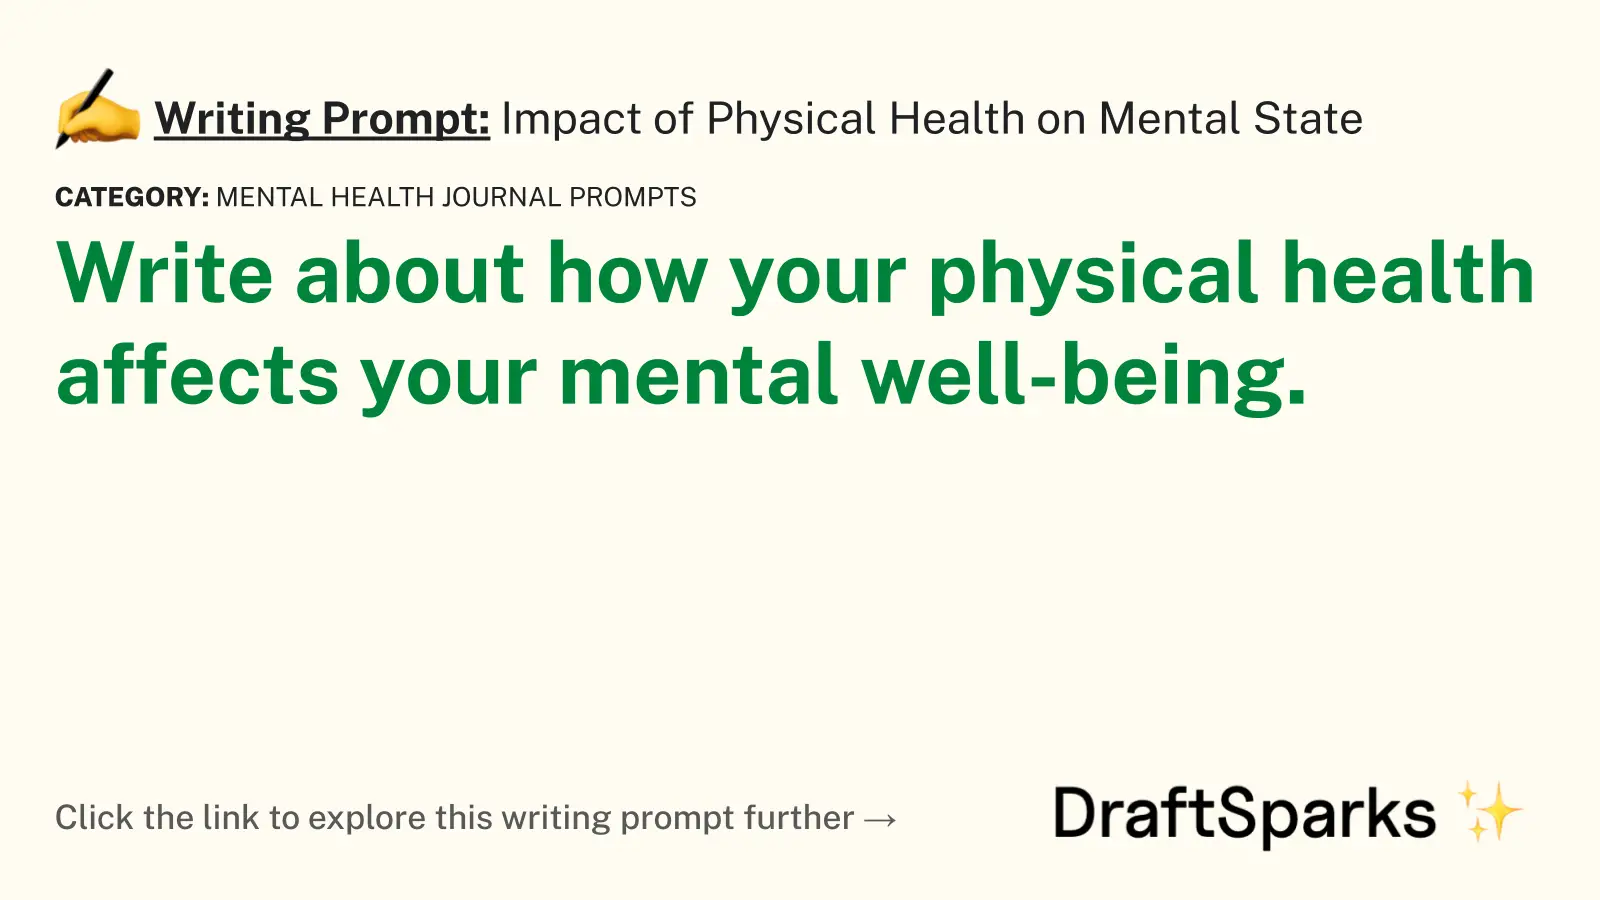 Impact of Physical Health on Mental State